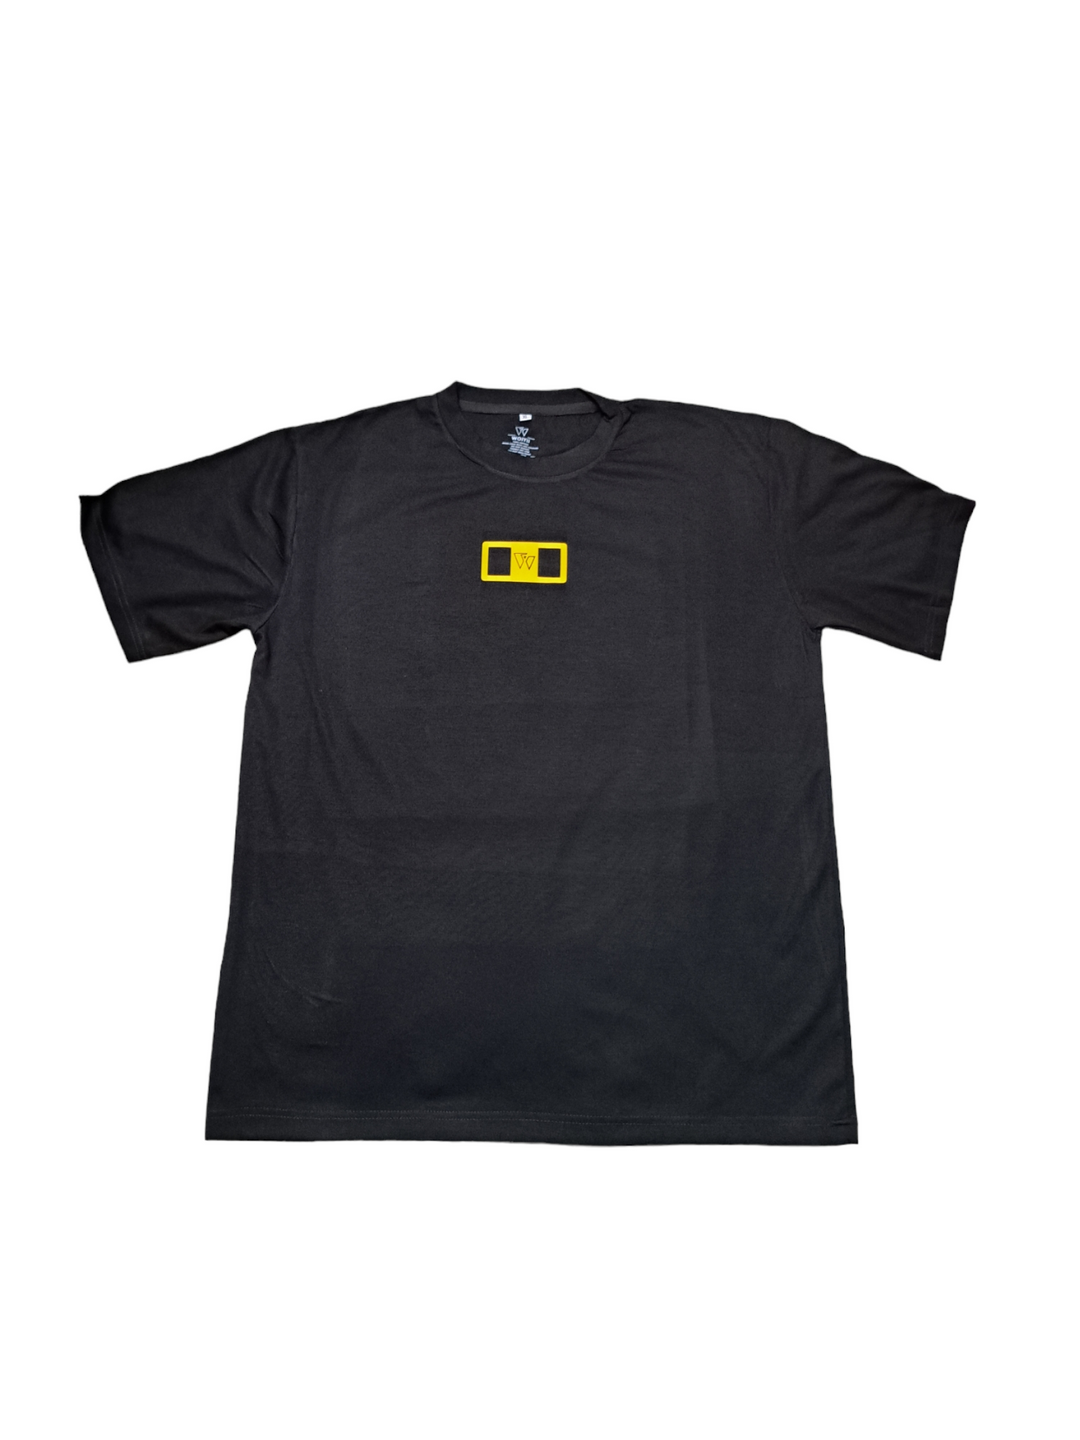 Disrupt the Norms Black T-Shirt